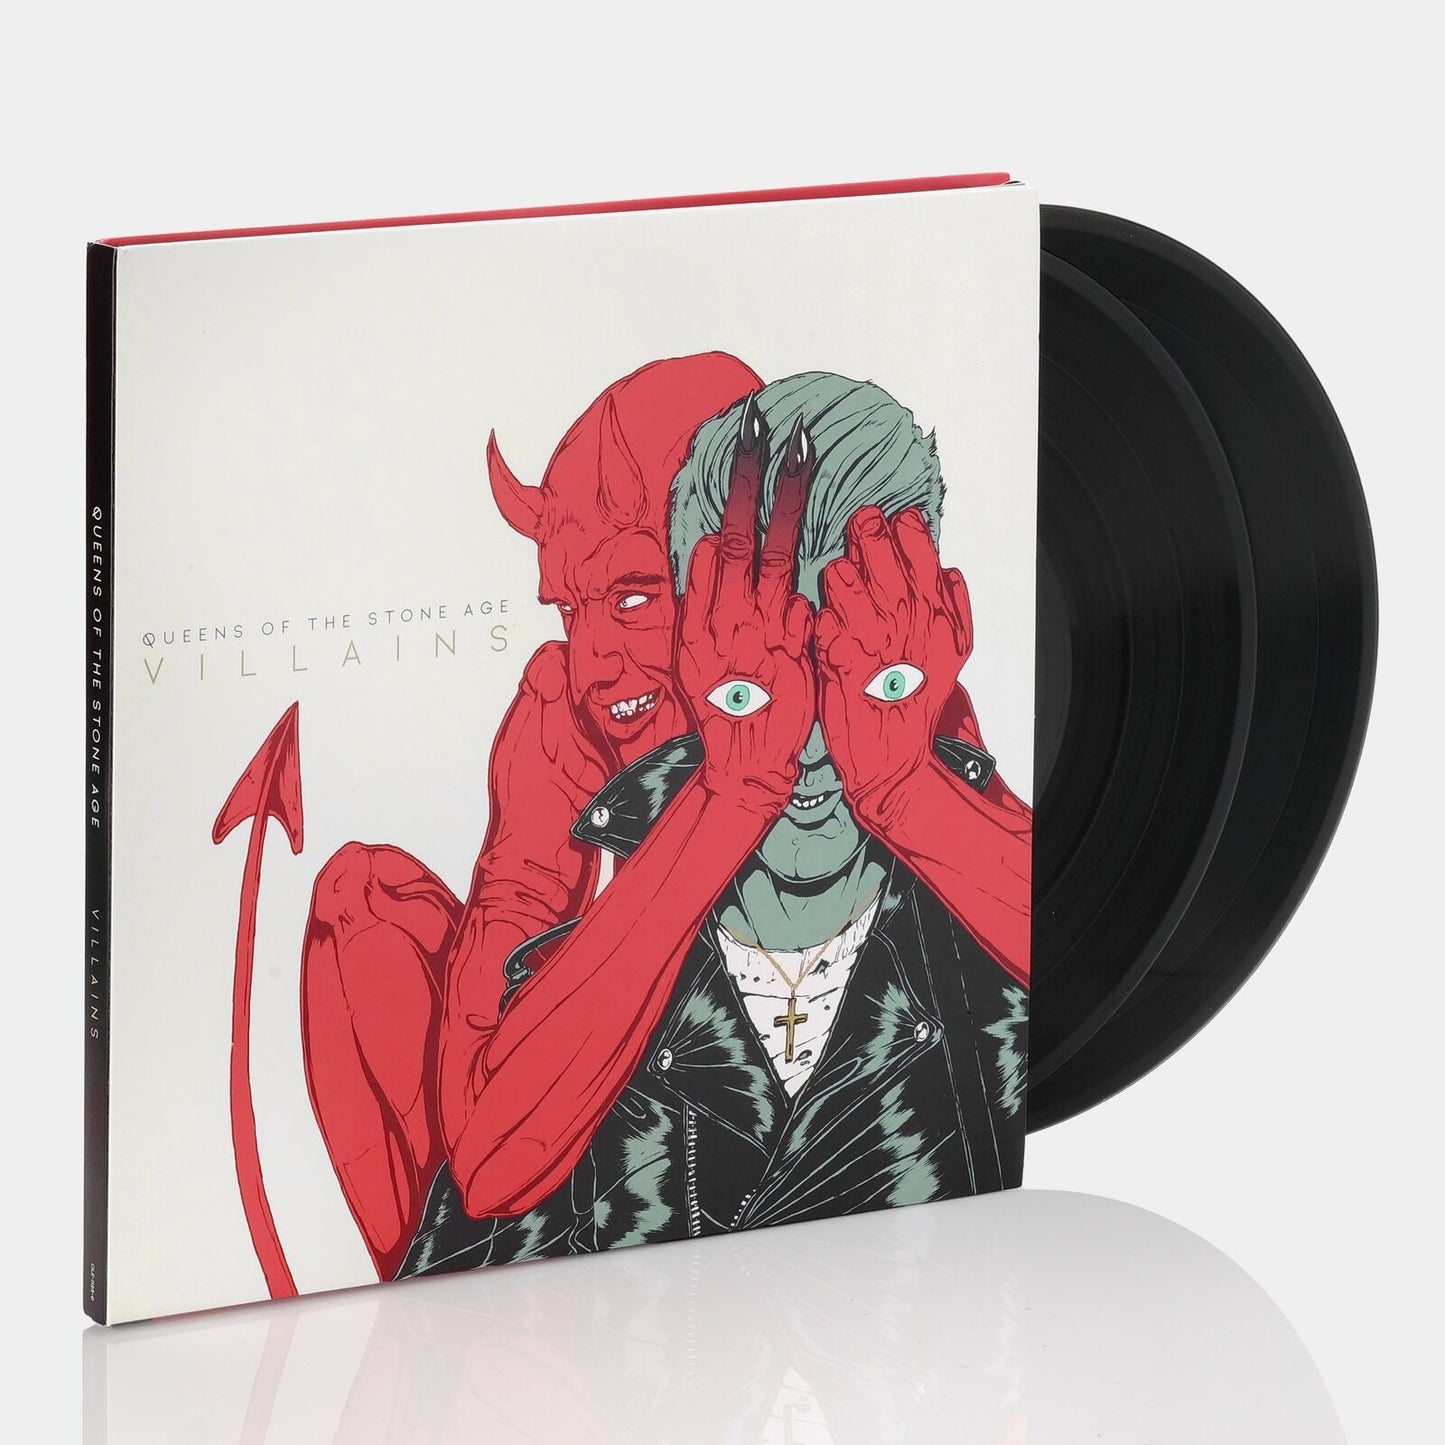 Queens Of The Stone Age – Villains [Deluxe] - 2XLP